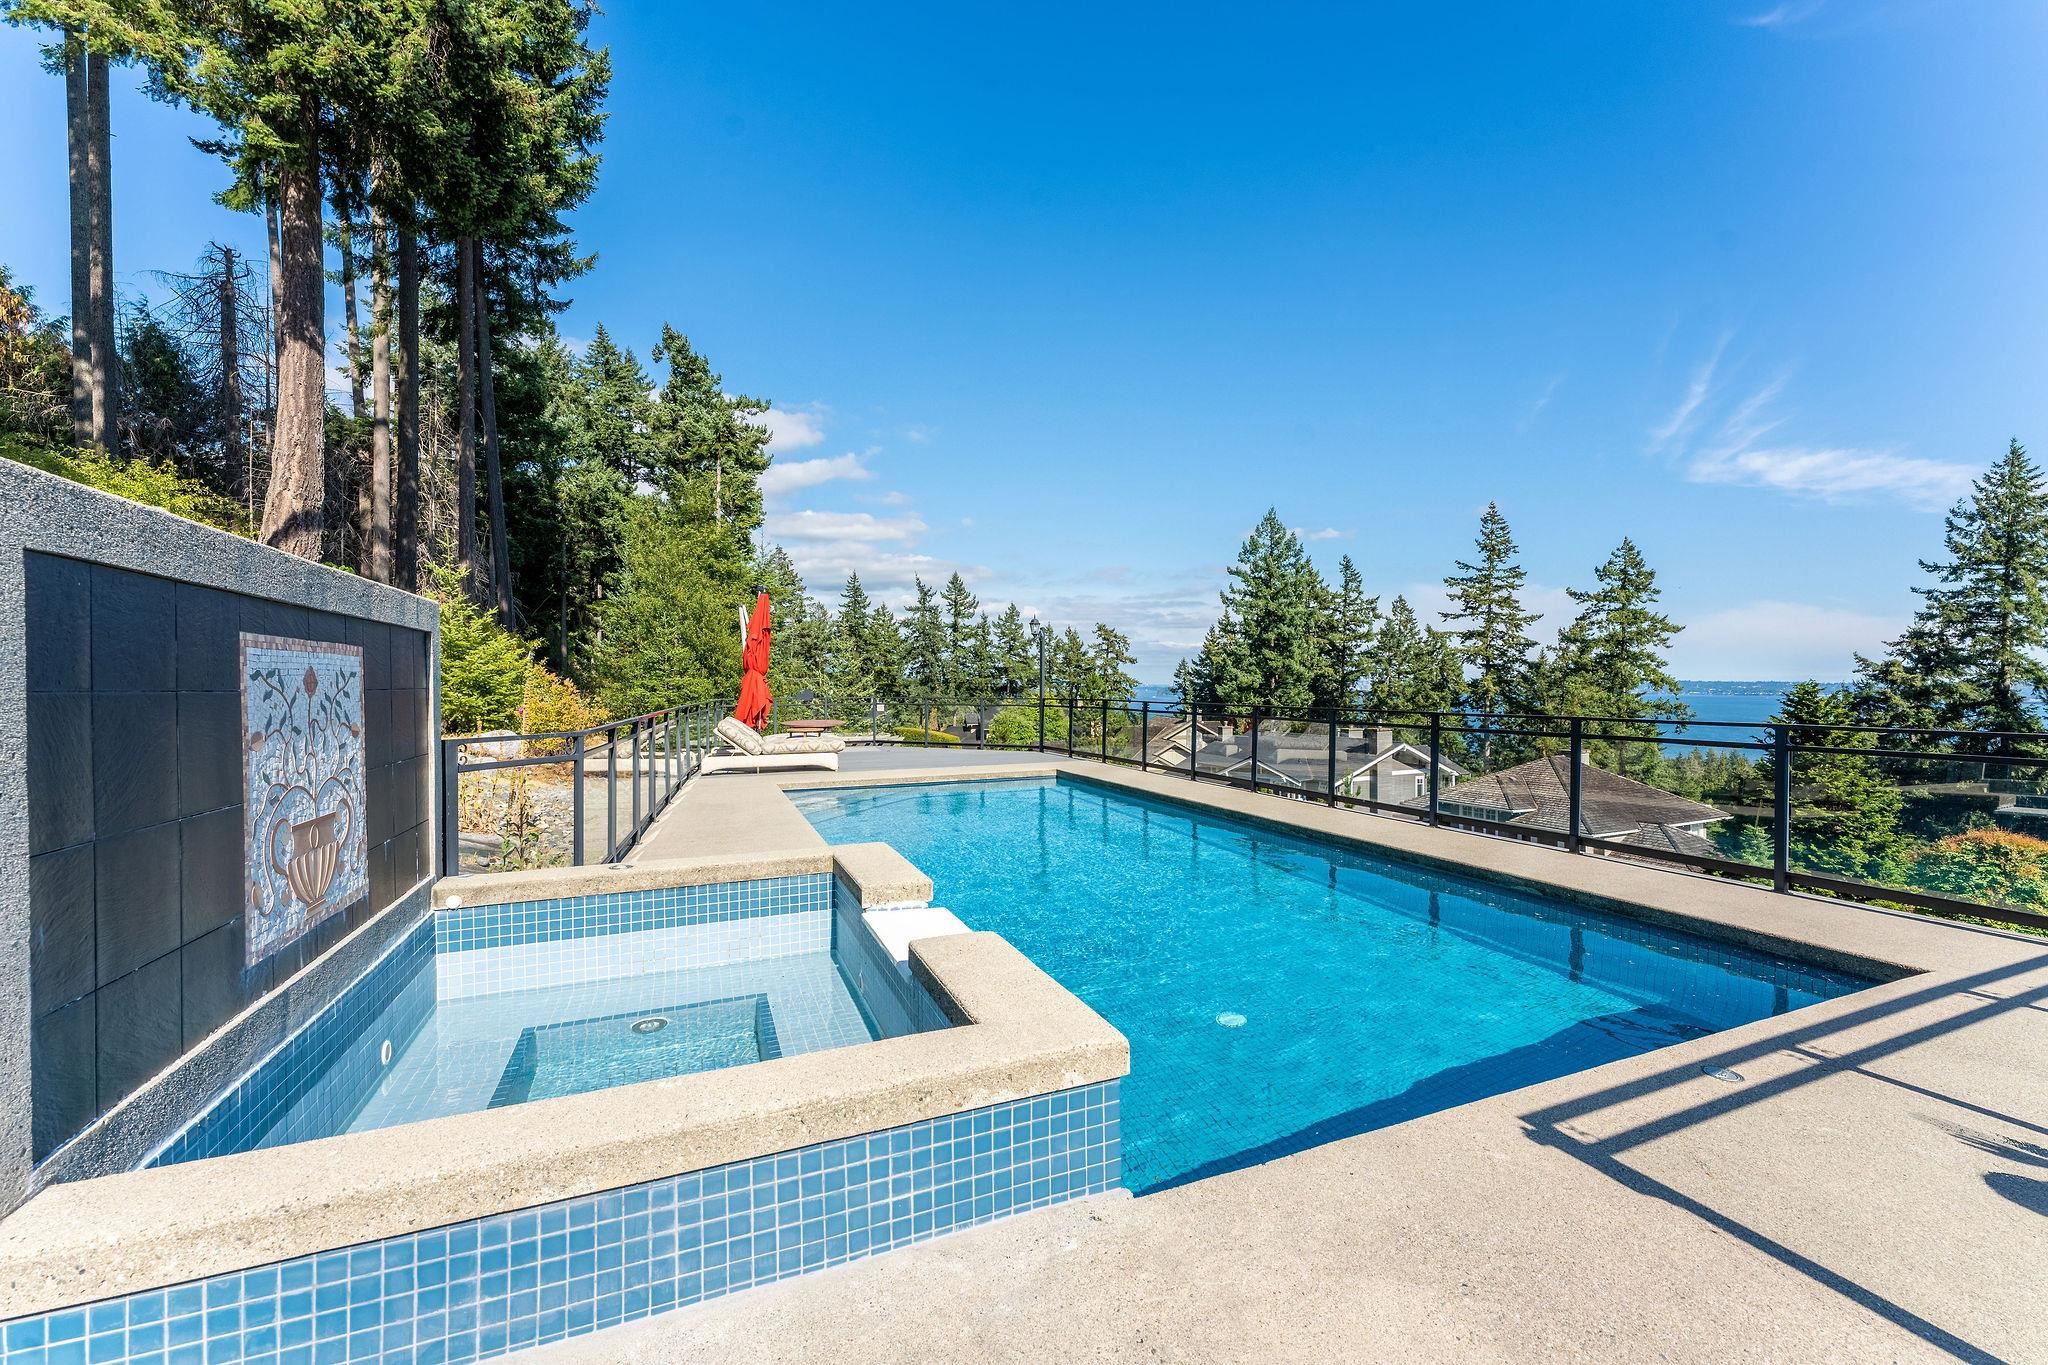 Listing image of 4845 VISTA PLACE